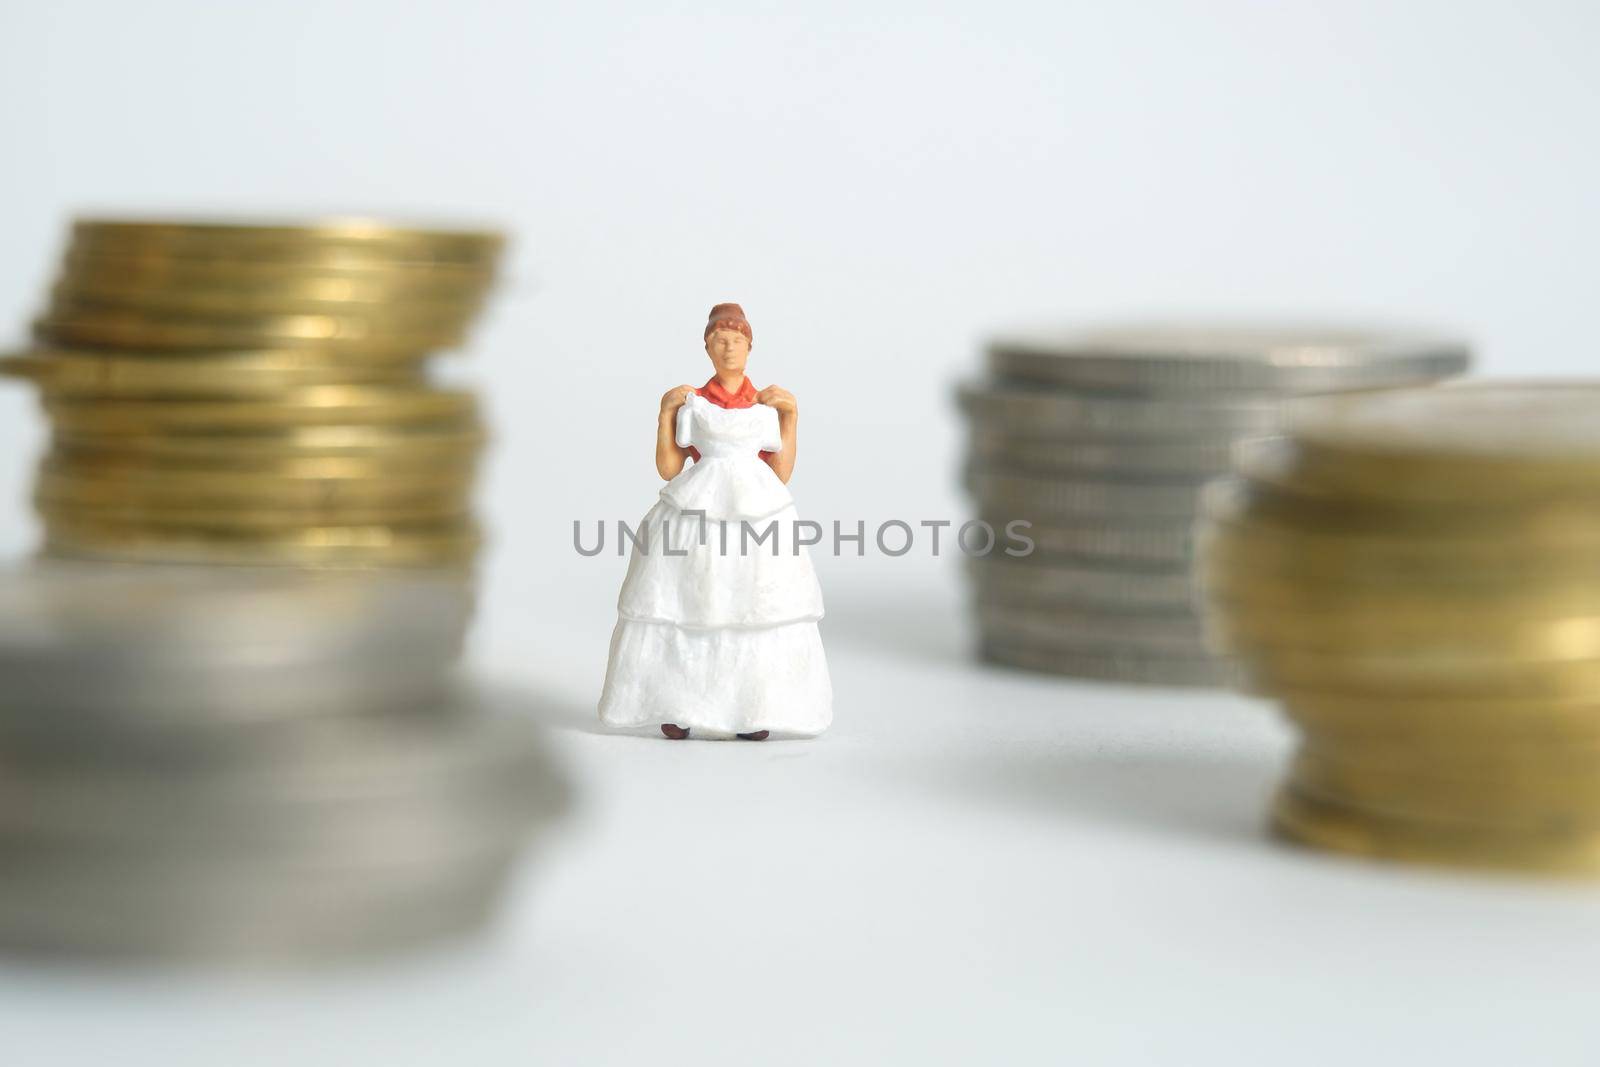 Wedding dress budget for bride, miniature people illustration concept. Woman standing between coin money stack. Image photo by Macrostud